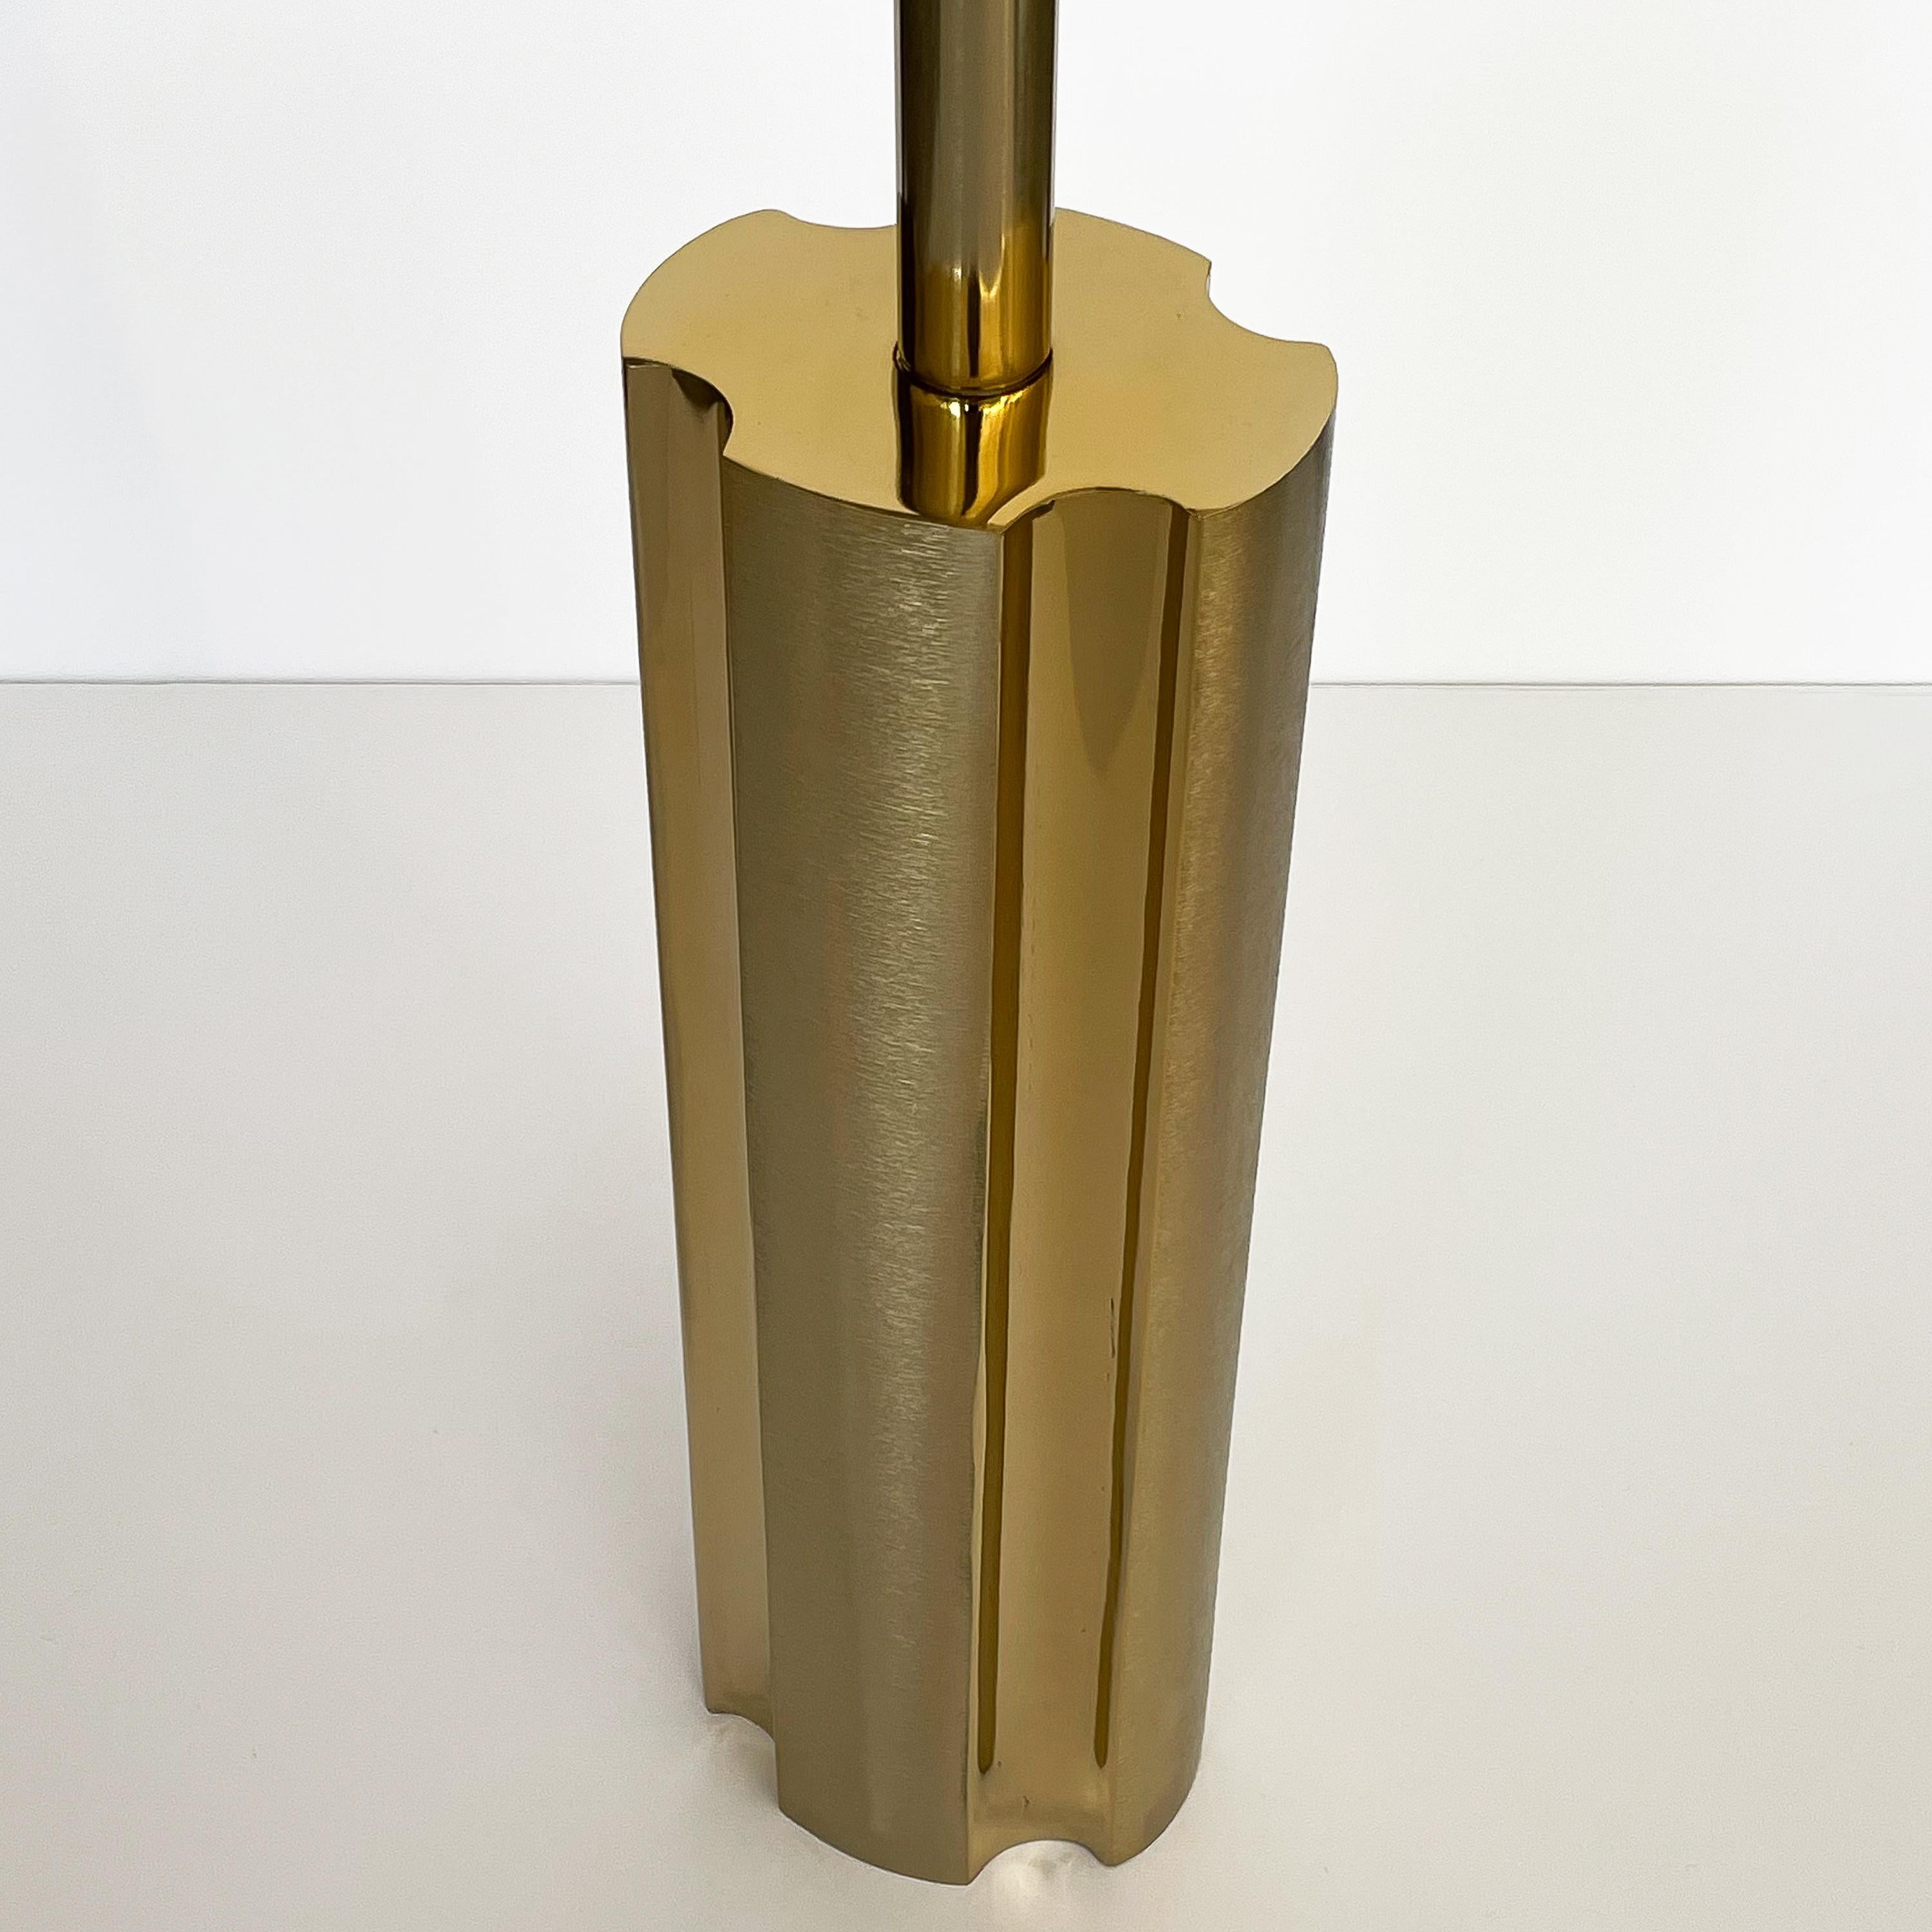 Late 20th Century Modernist Brushed and Polished Brass Table Lamp by Laurel